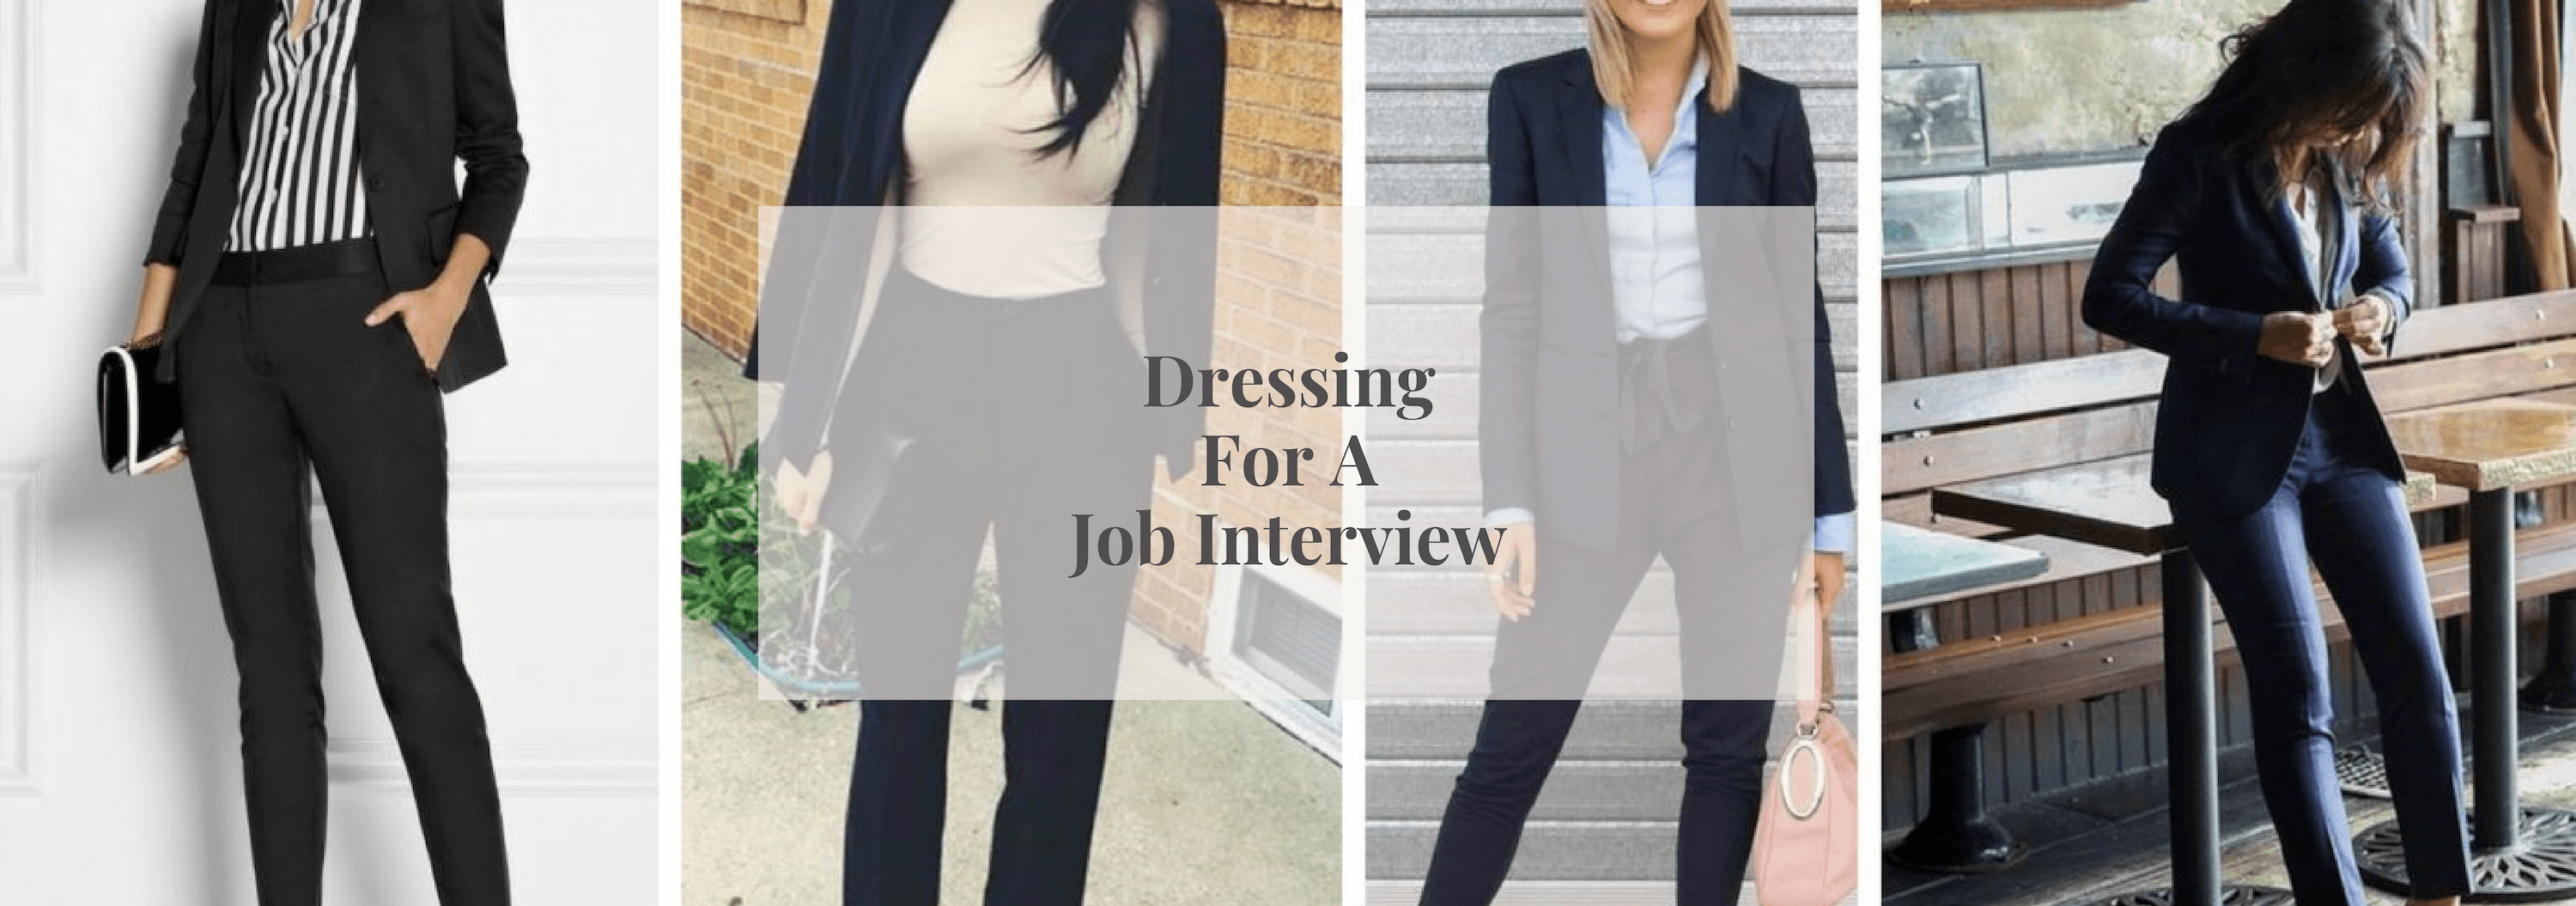 Dressing For A Job Interview - Numi